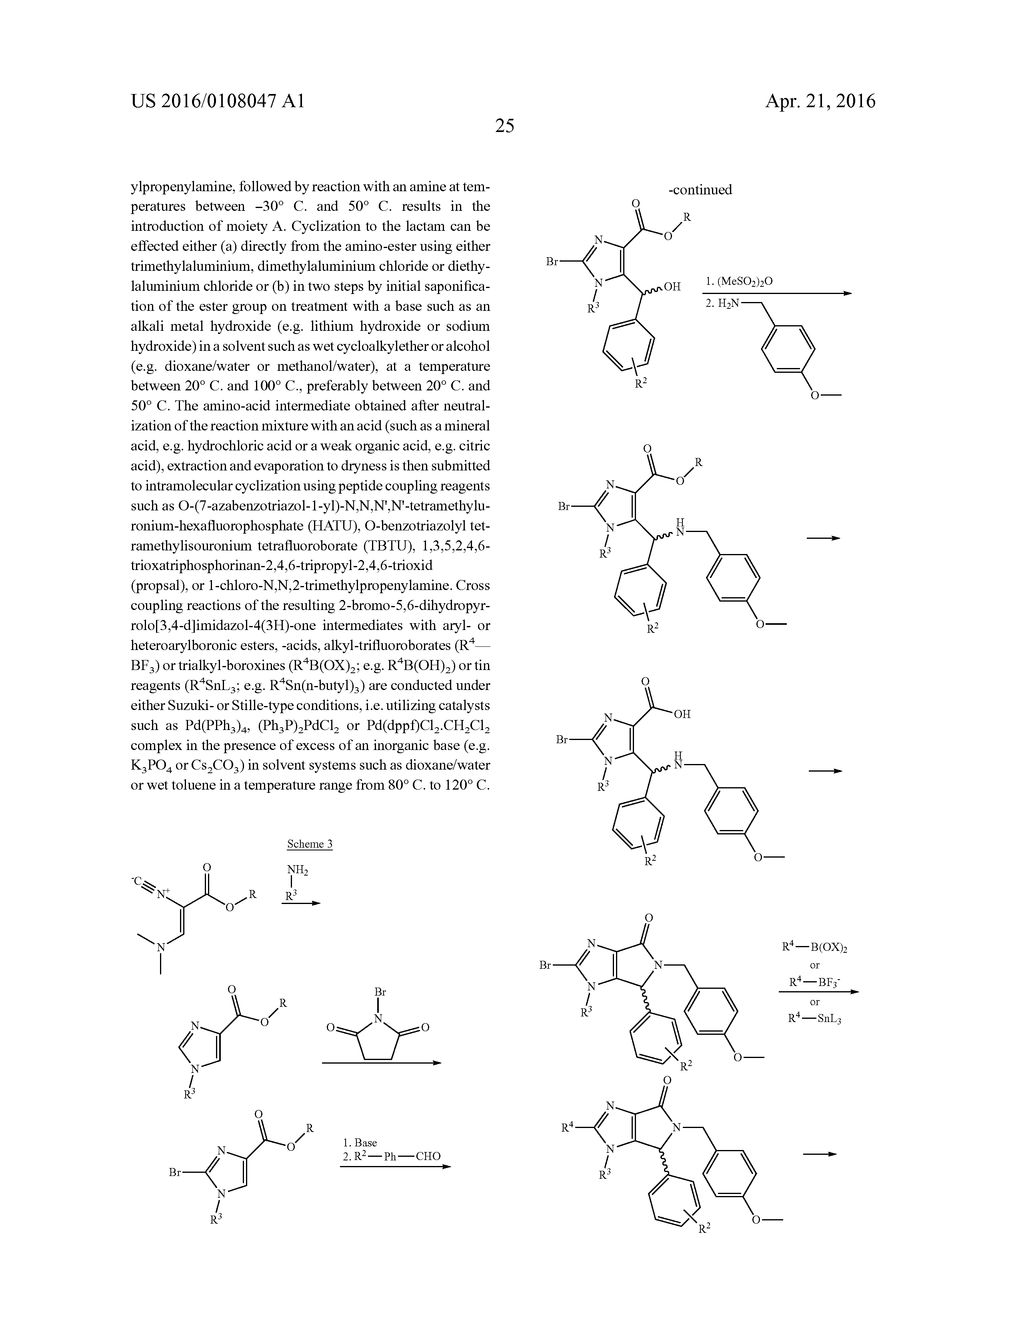 IMIDAZOPYRROLIDINE DERIVATIVES AND THEIR USE IN THE TREATMENT OF DISEASE - diagram, schematic, and image 26